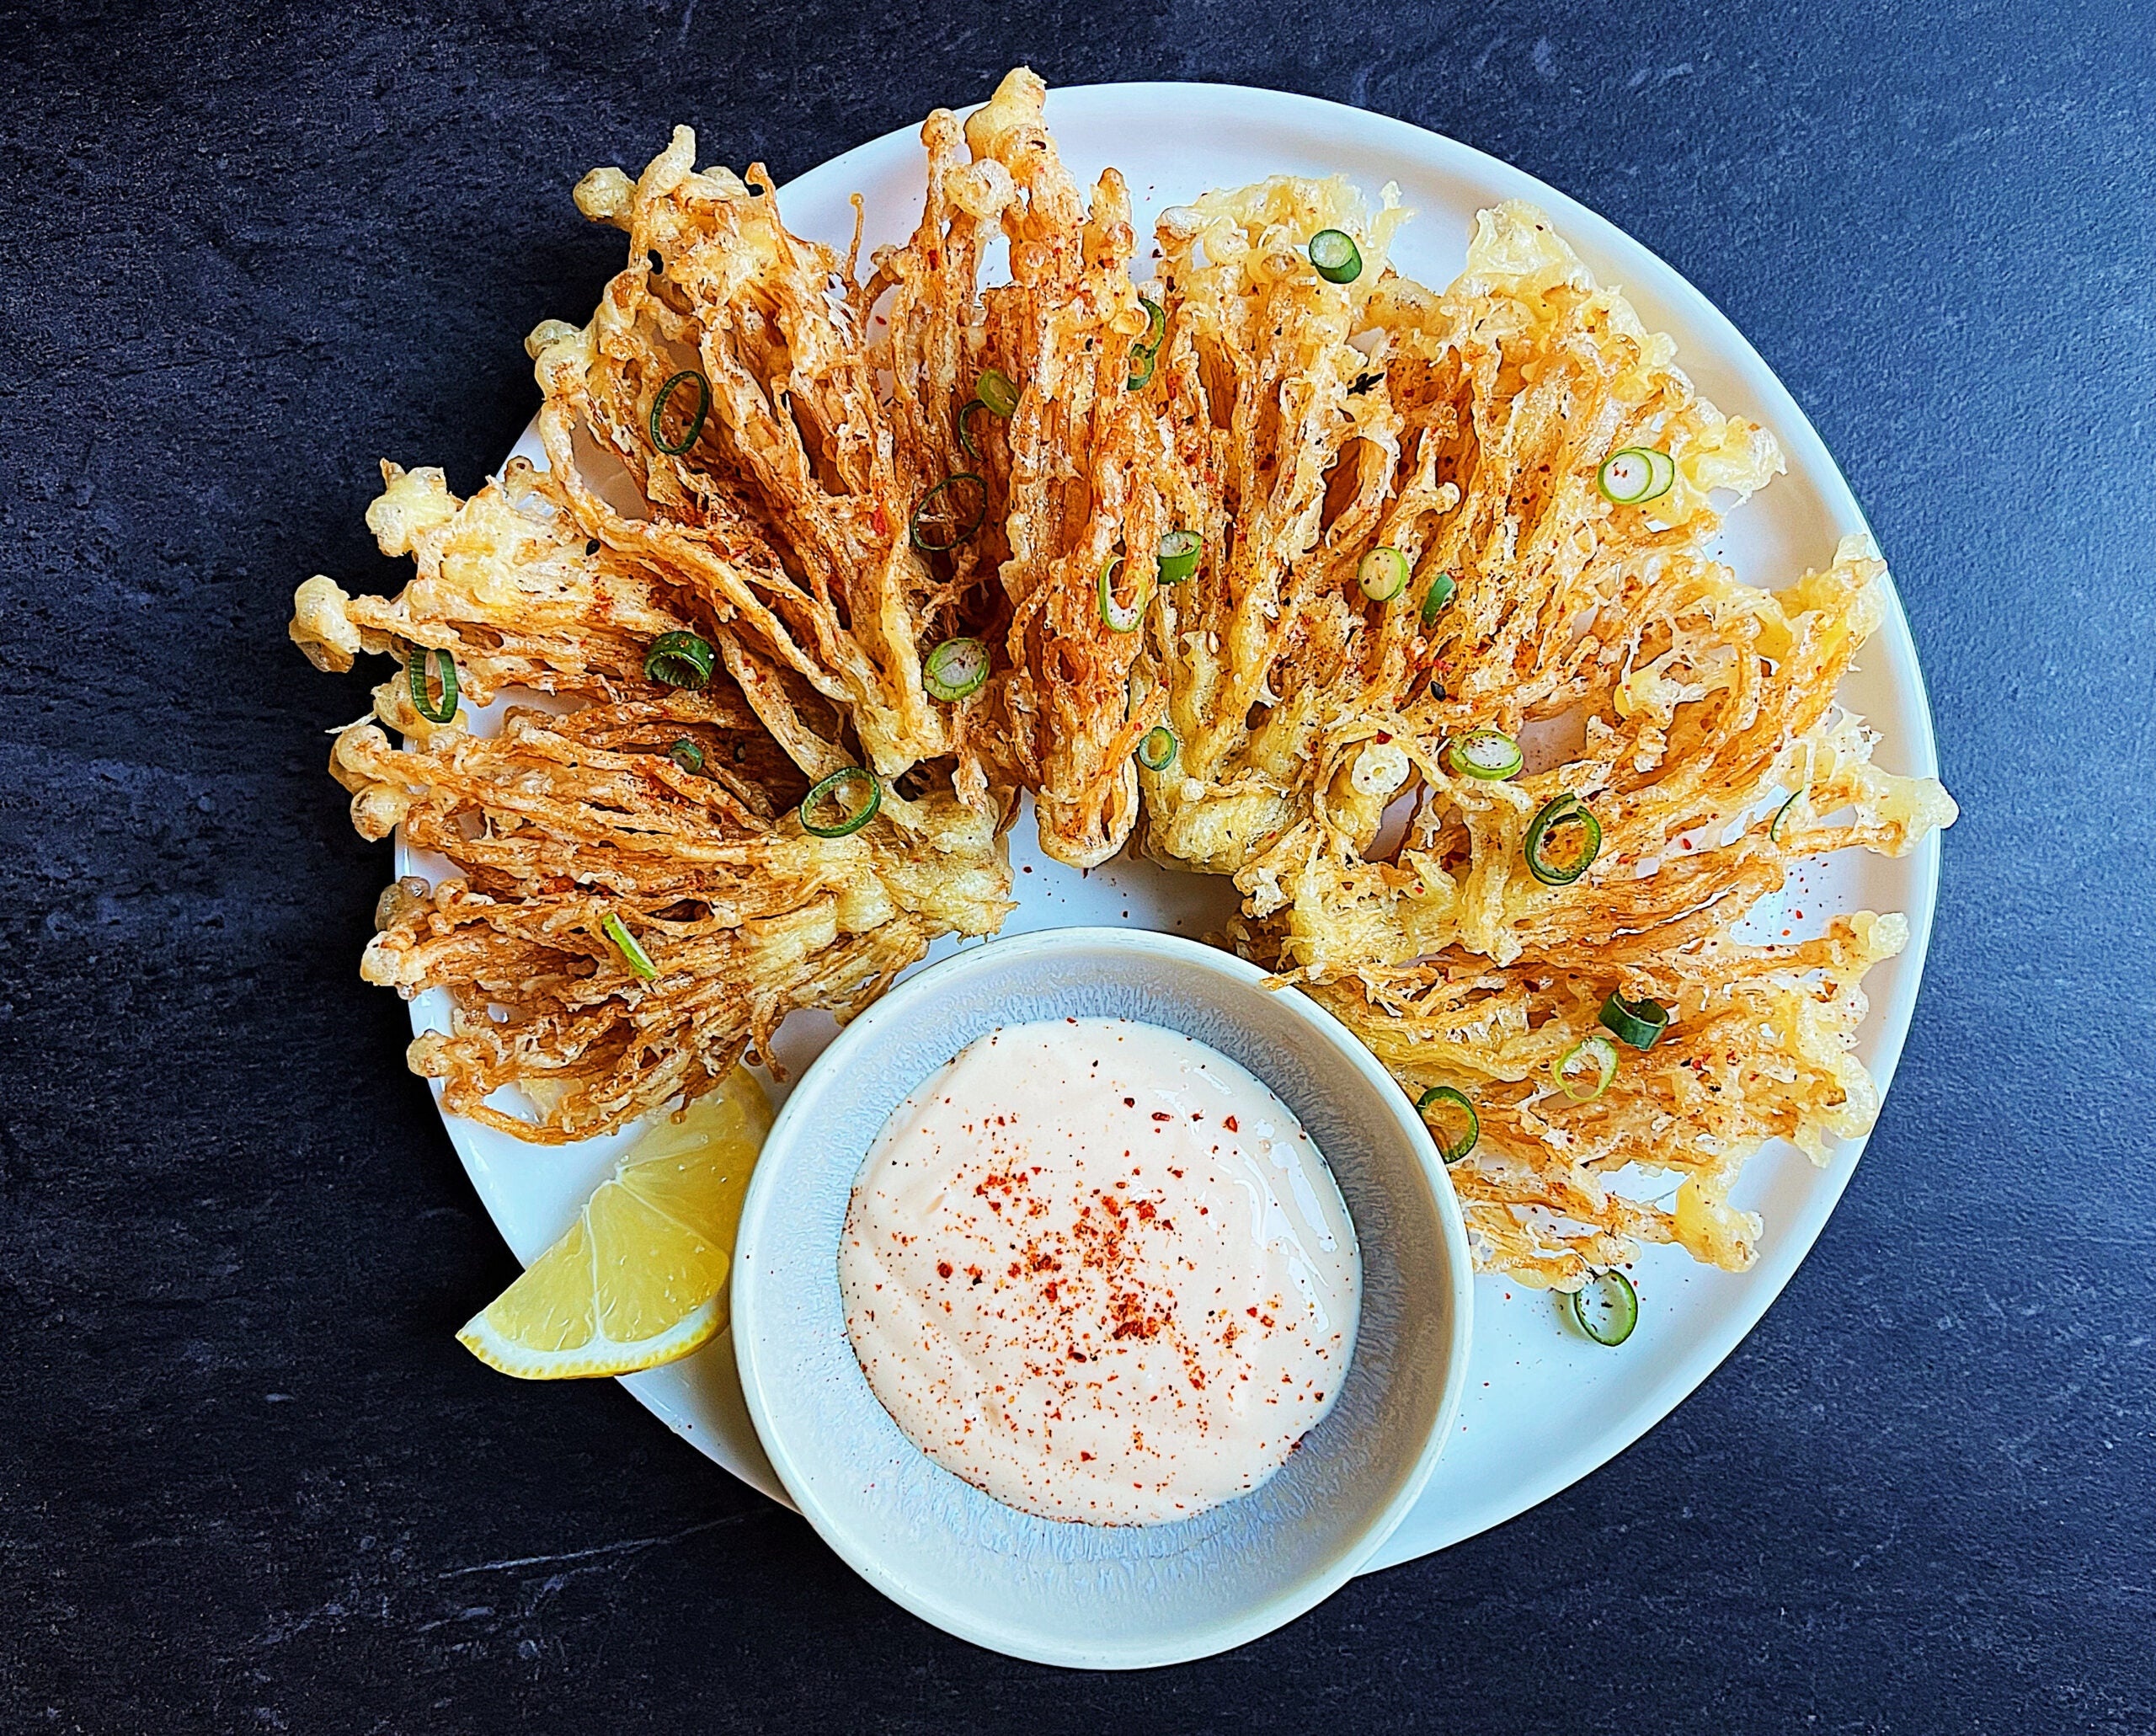 Bloomin onion makeover, Spicy sauce, Vegan-friendly appetizer, Plant-based recipe, 2560x2070 HD Desktop